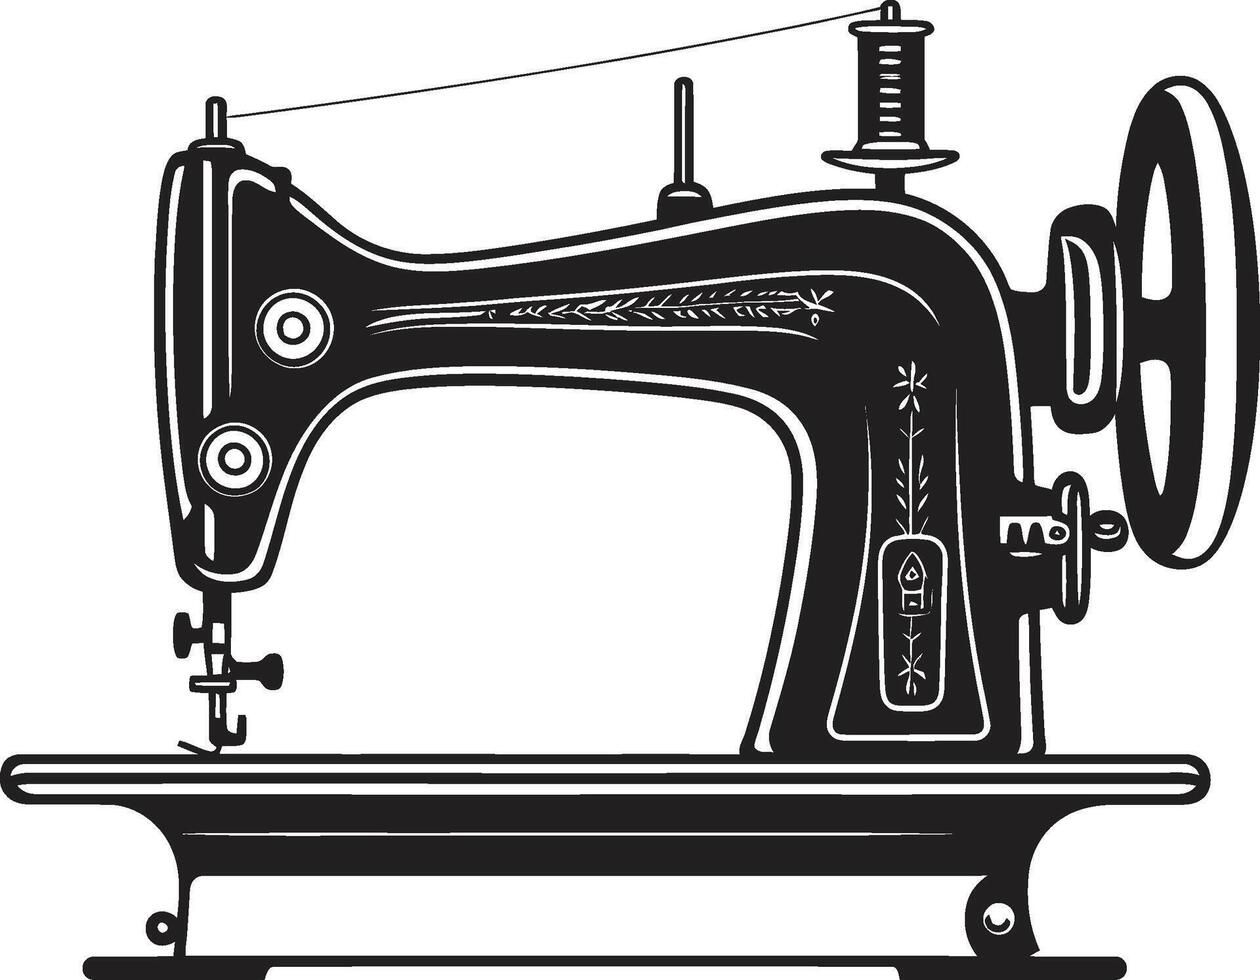 Seamstress Mastery Elegant of Black Sewing Machine Crafted Couture Black for Sewing Machine vector